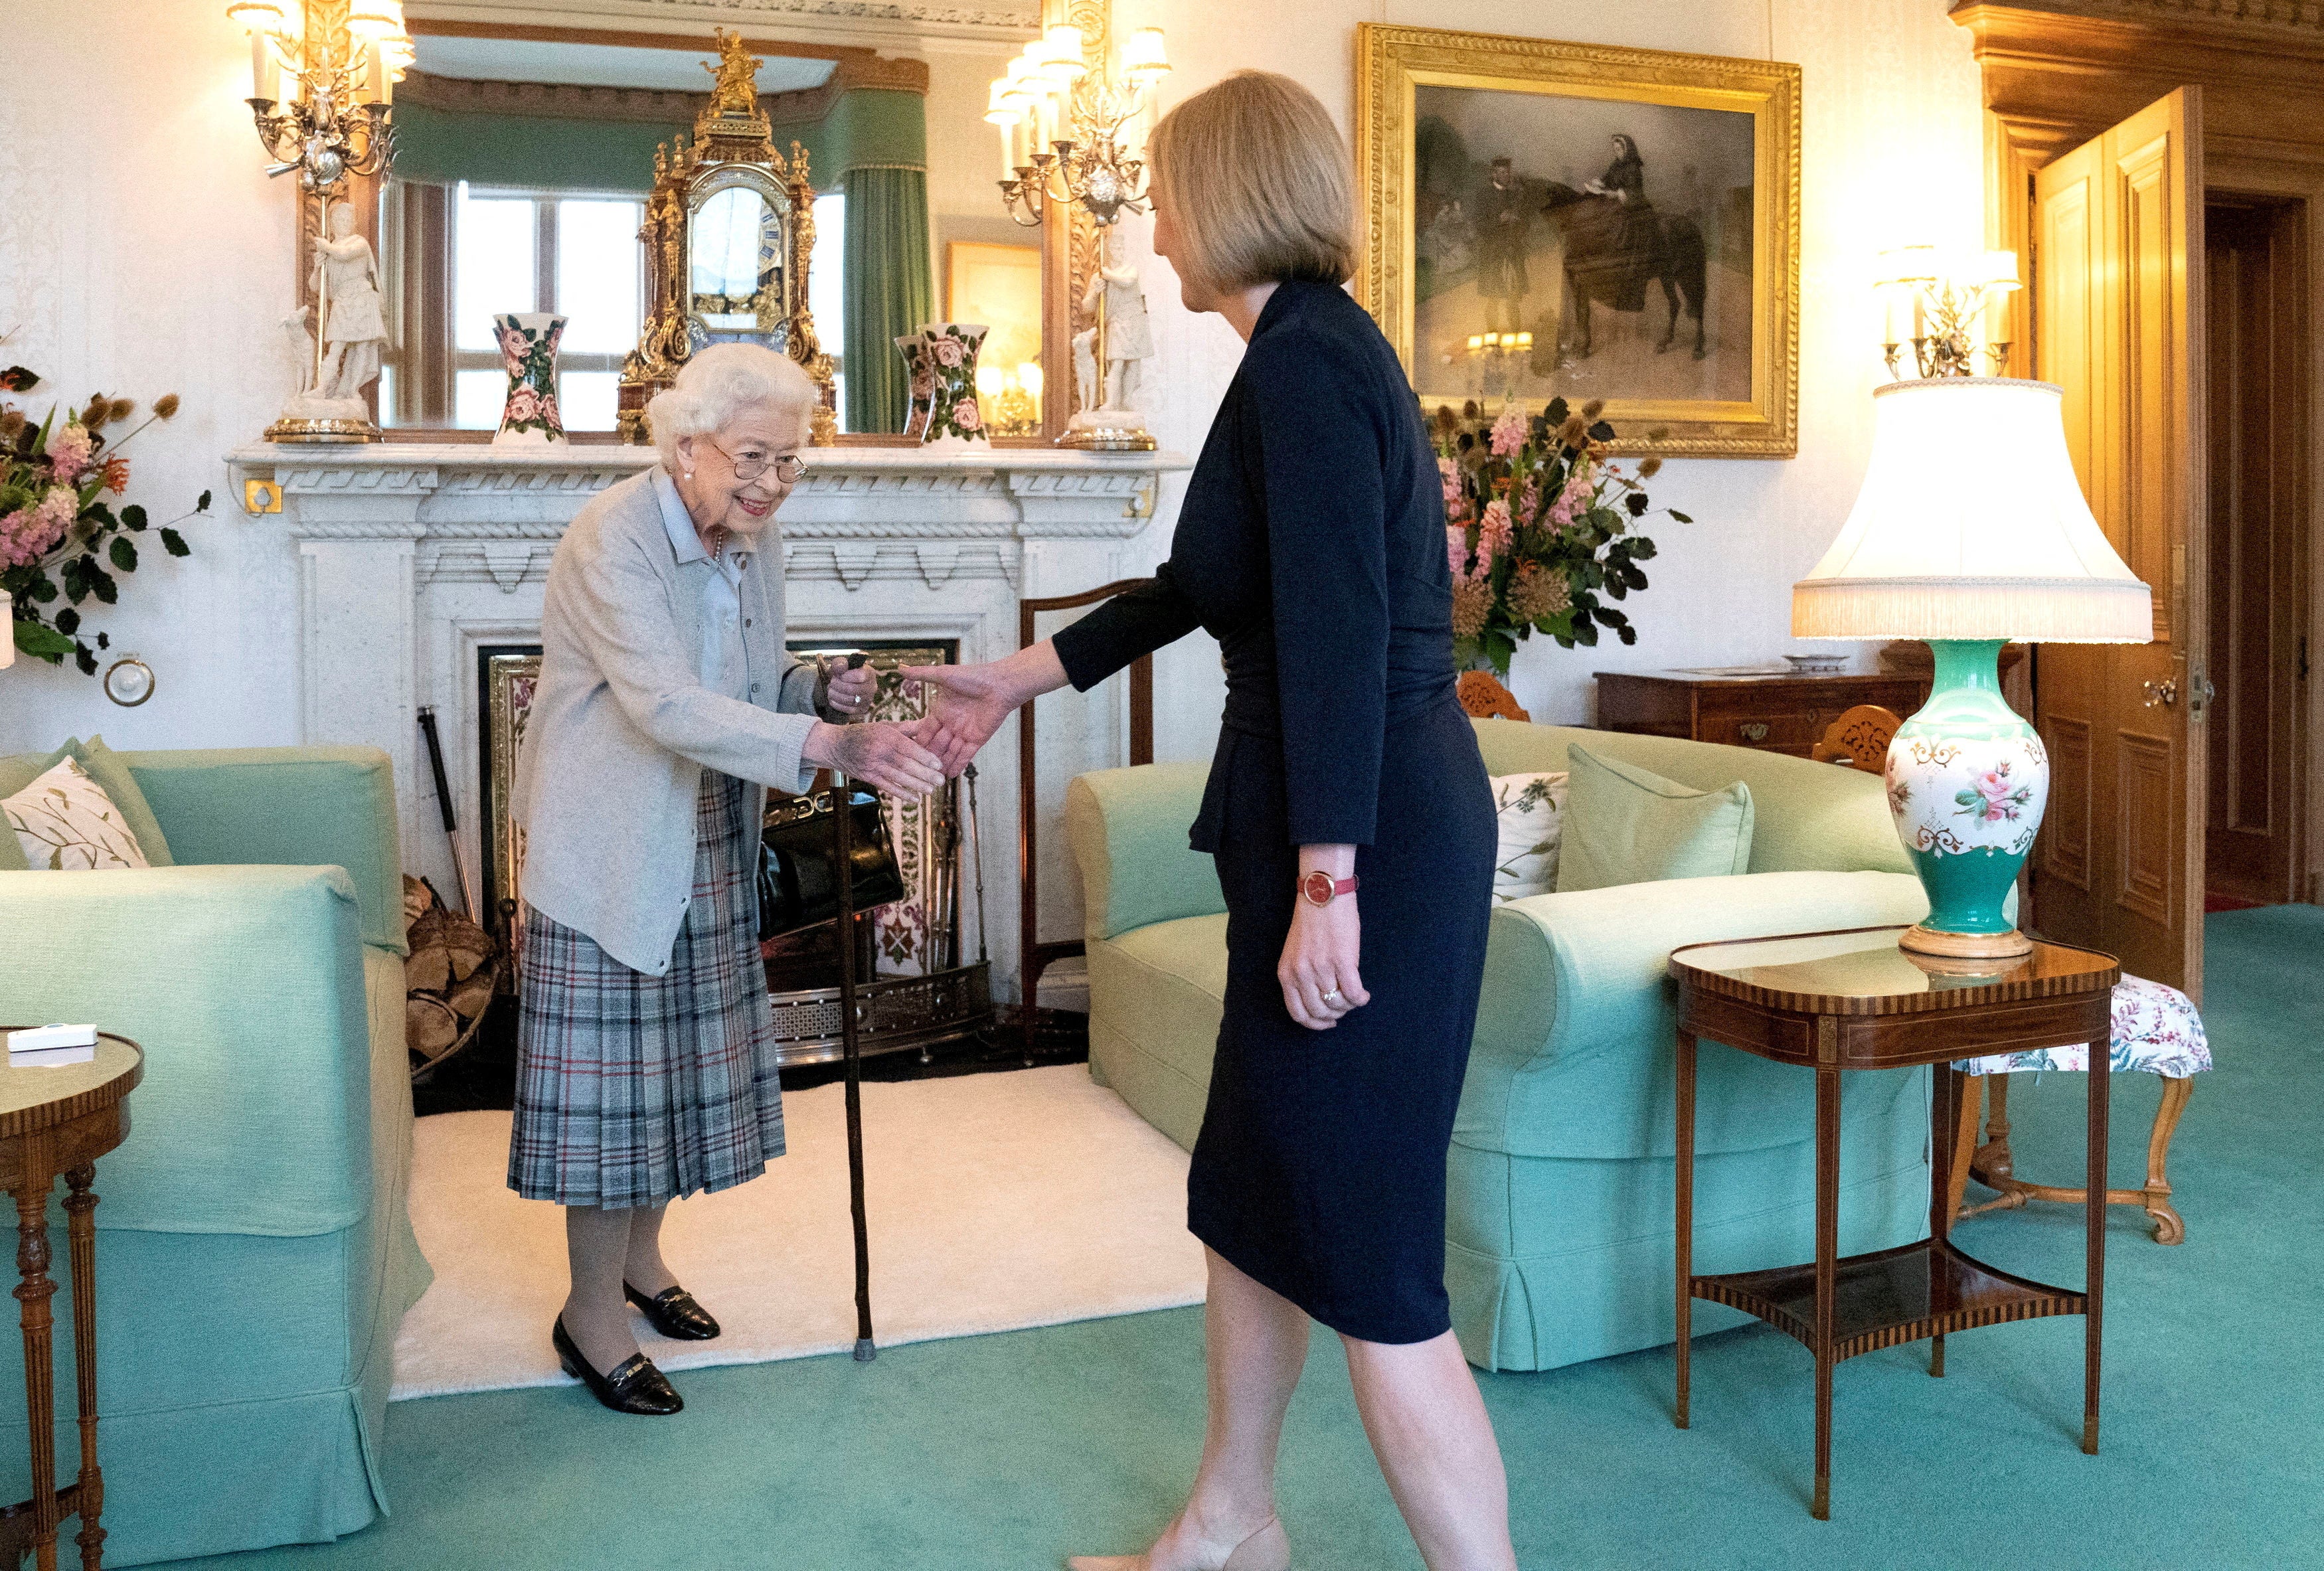 Queen Elizabeth welcomes Liz Truss during an audience at Balmoral Castle, Scotland, on 6 September